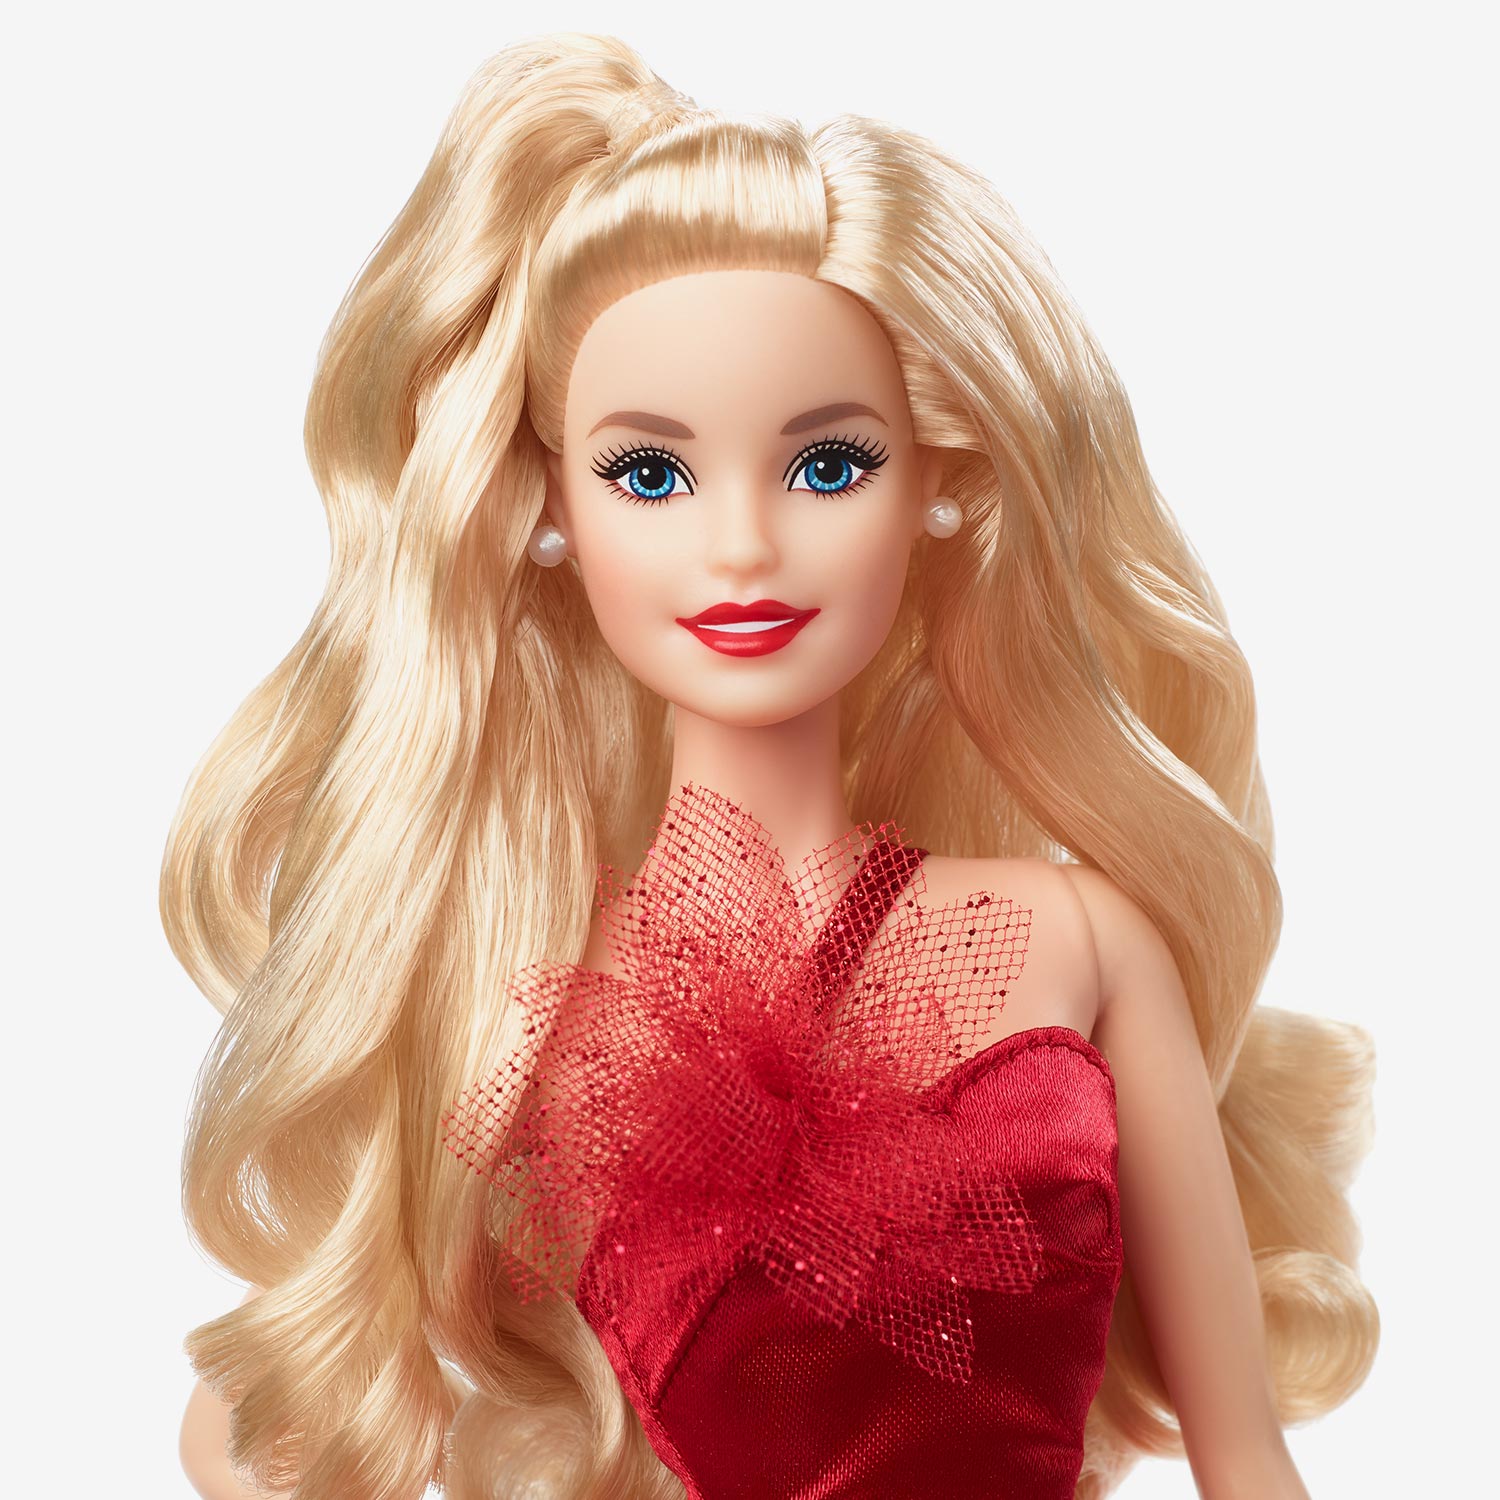 New Blonde Holiday Barbie 2022 Barbie Lights Up Christmas 2022 In A Traditional Poinsettia